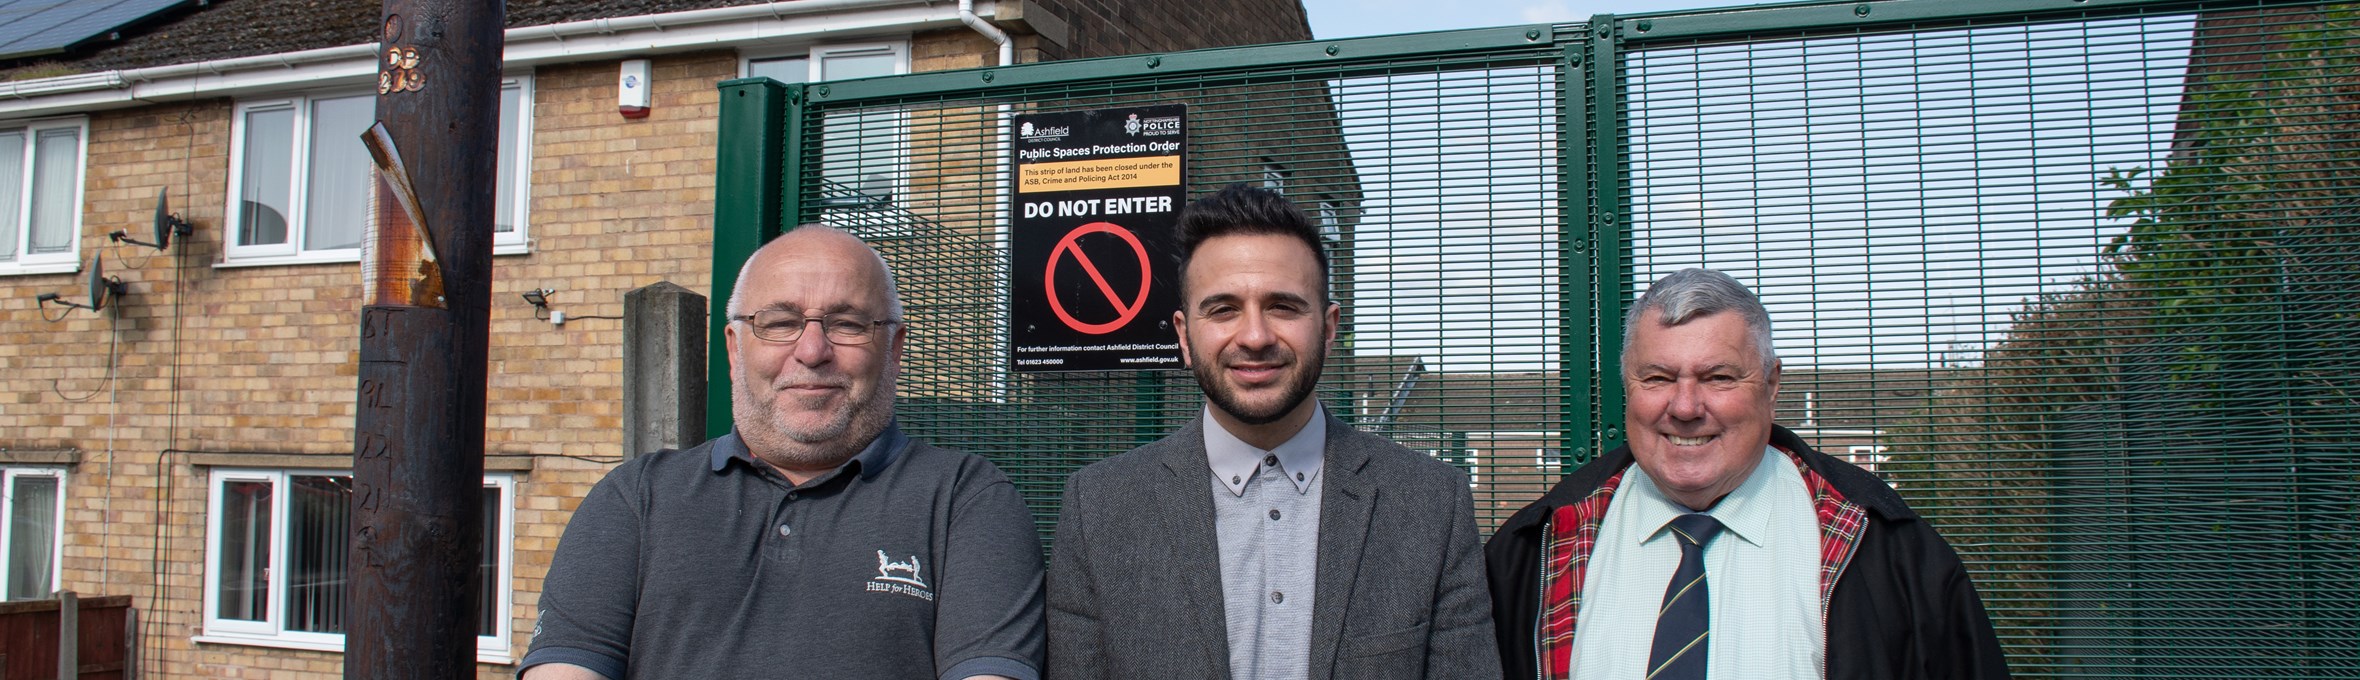 Cllr Andy Meakin, Antonio Taylor, and Cllr Warren Nuttall outside the gate on Beacon Drive 